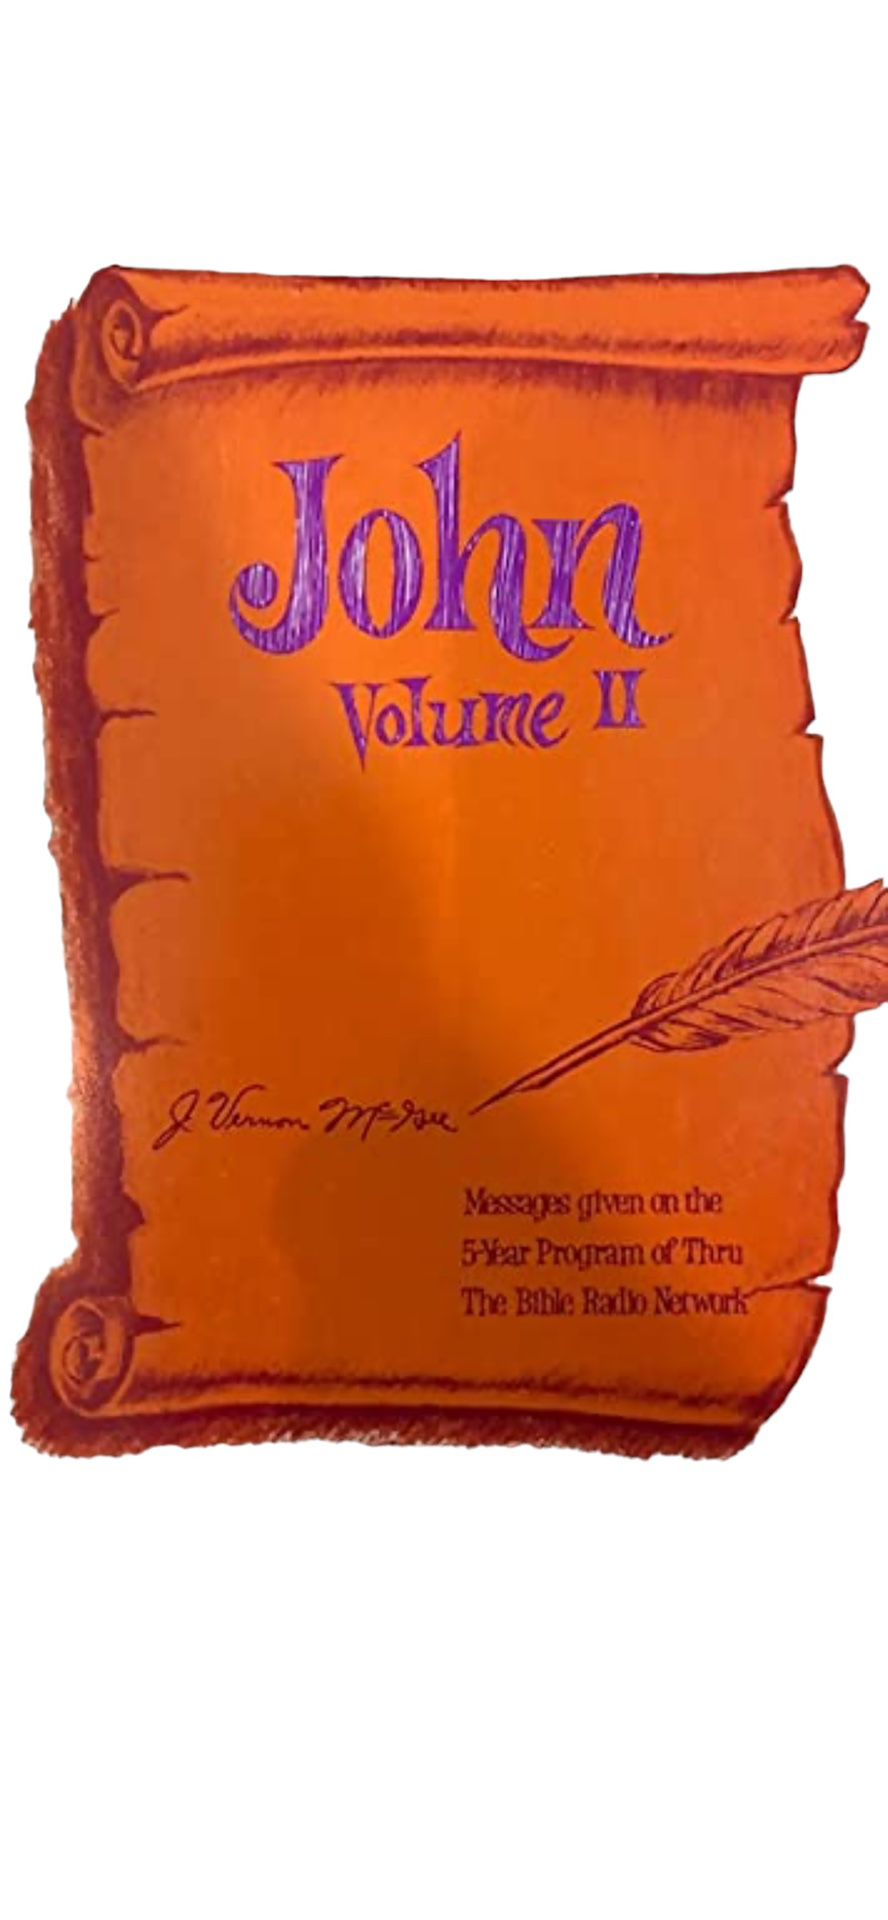 John, Volume II, Chapters 11-21 book by Visit   J. Vernon McGee  Discover the fascinating world of spirituality and religion with "John, Volume II, Ch